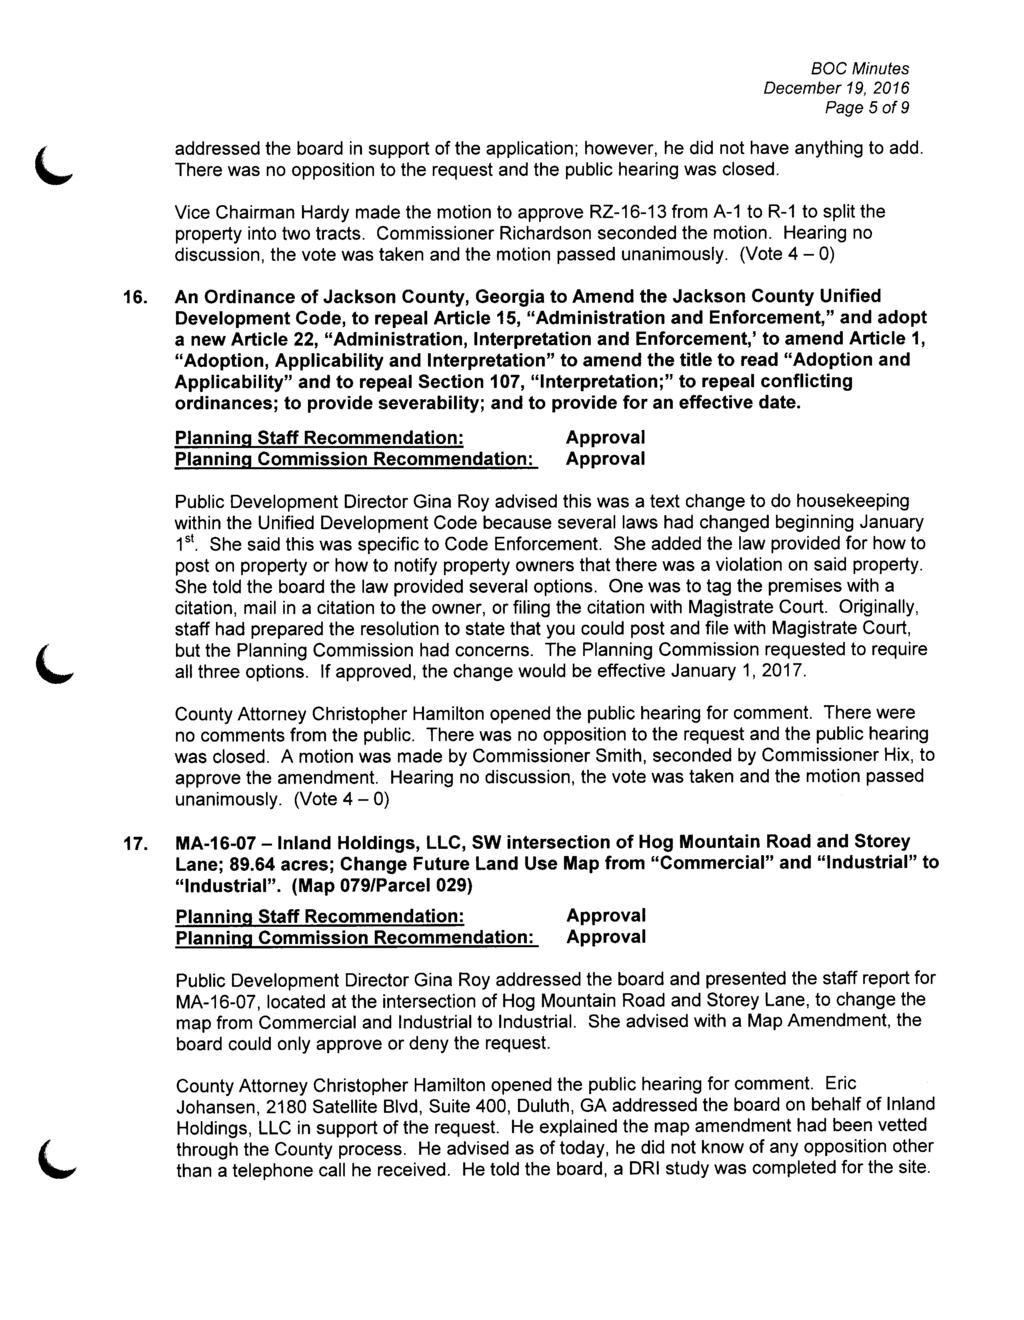 Page 5 of 9 addressed the board in support of the application; however, he did not have anything to add. There was no opposition to the request and the public hearing was closed.